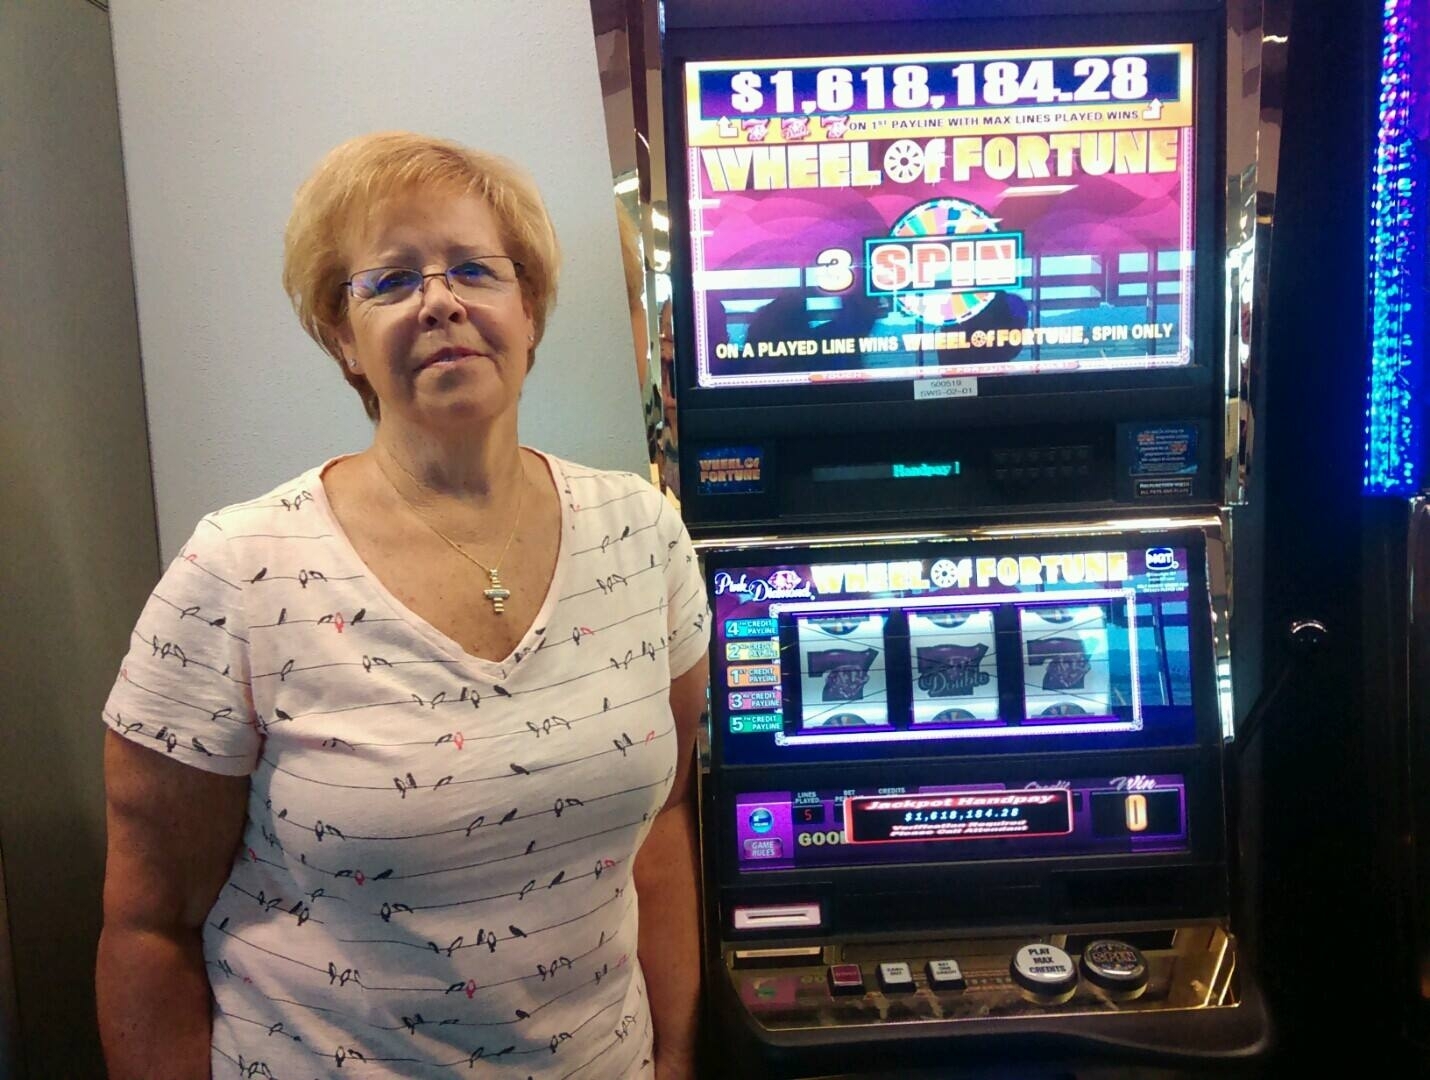 Woman wins $1.6m Wheel of Fortune jackpot while waiting in Las Vegas airport